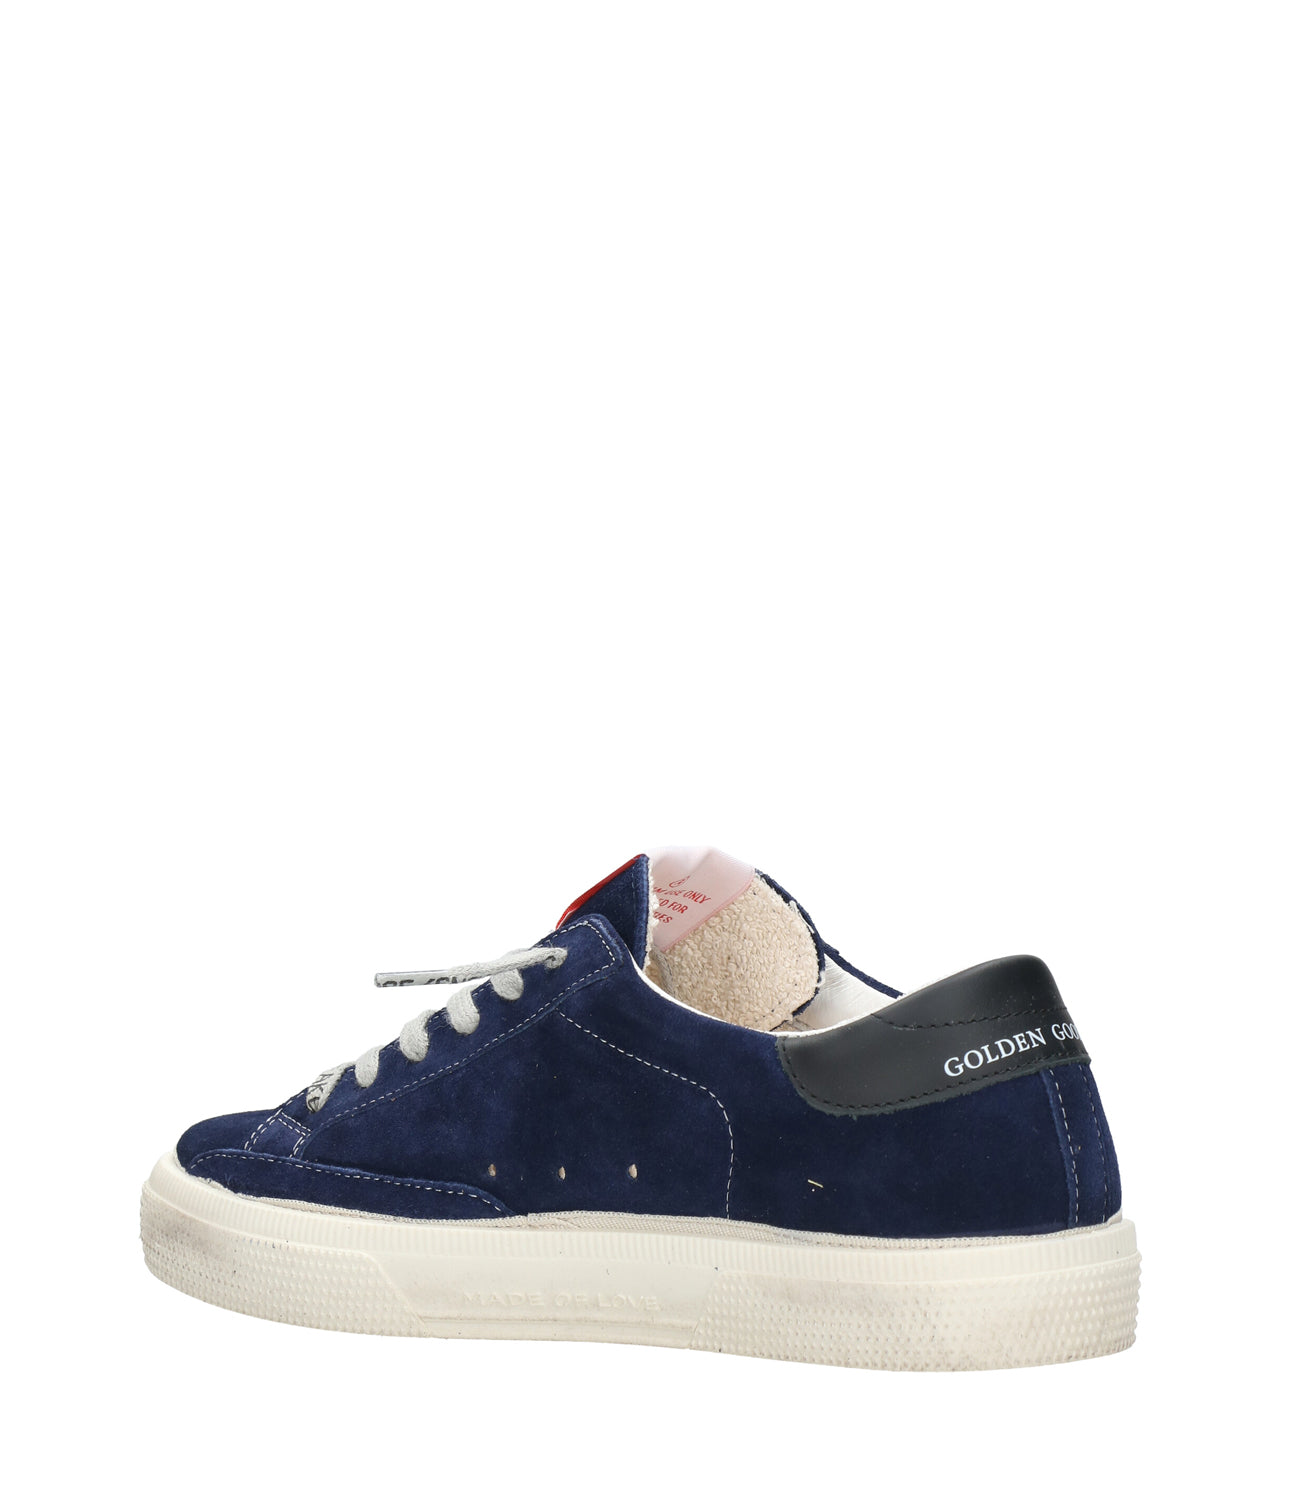 Golden Goose Deluxe Brand | Sneakers May Dark Blue, Silver and Black